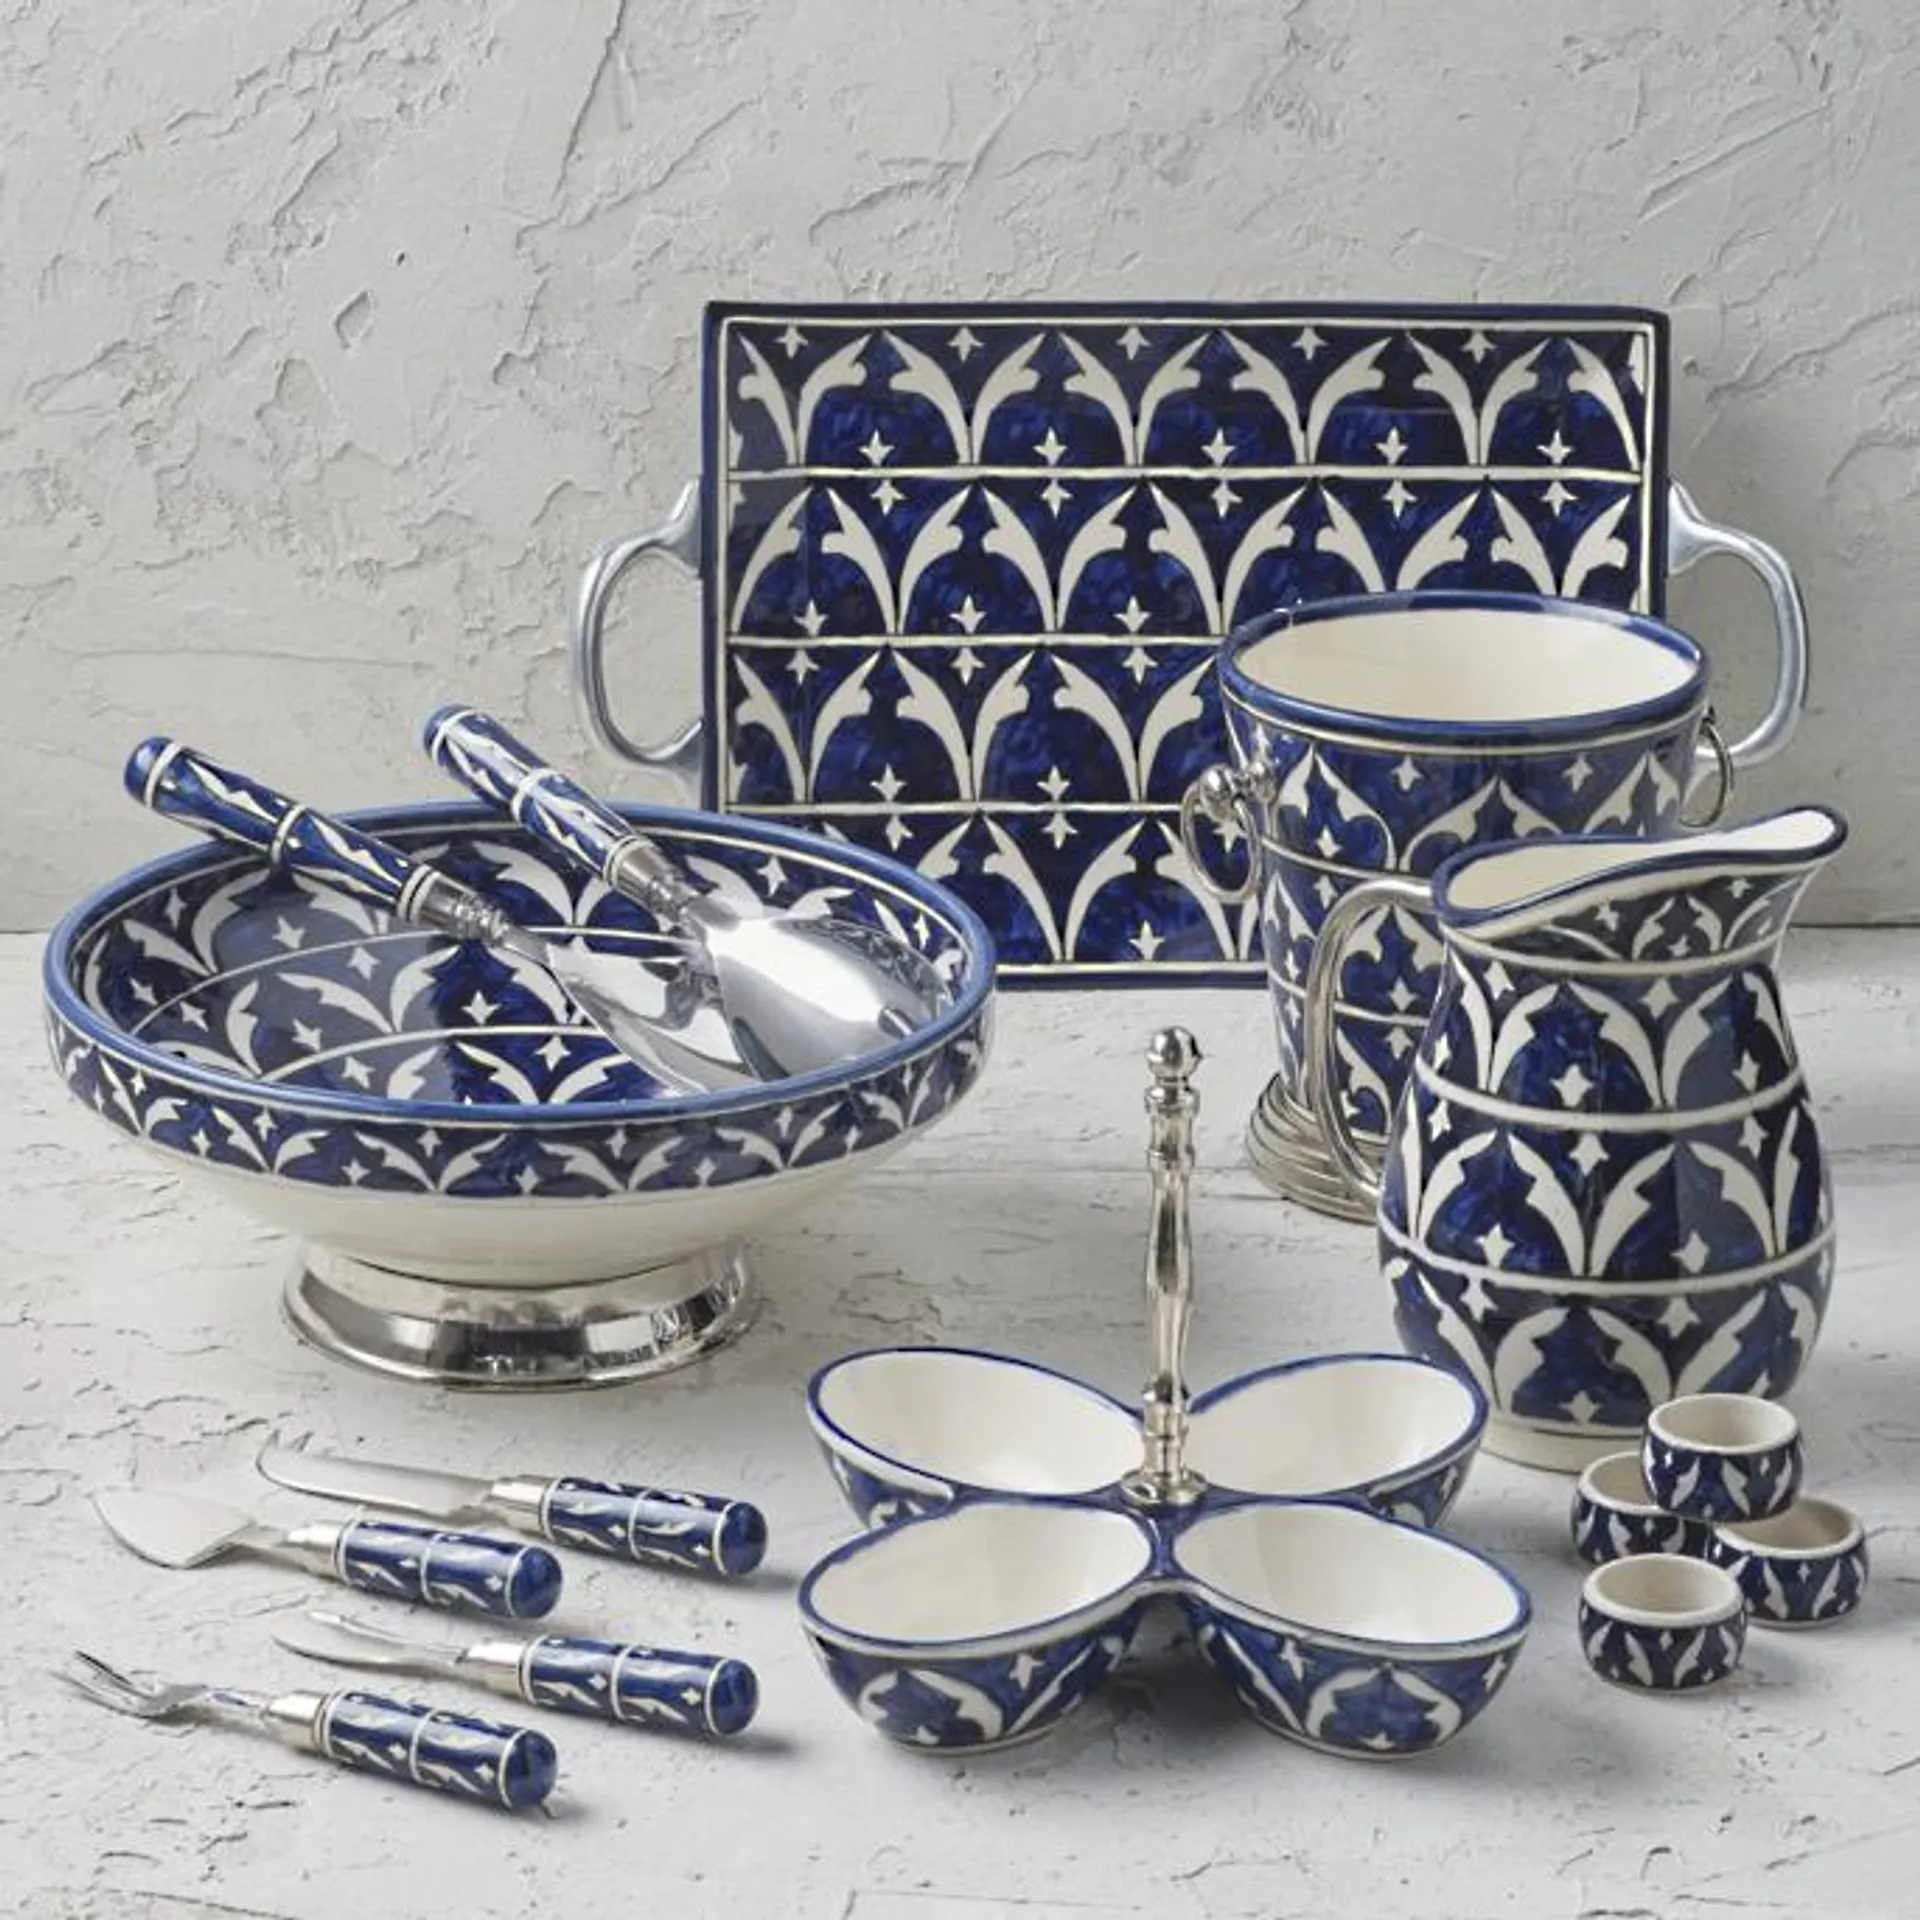 Piazza Ceramic Serving Collection